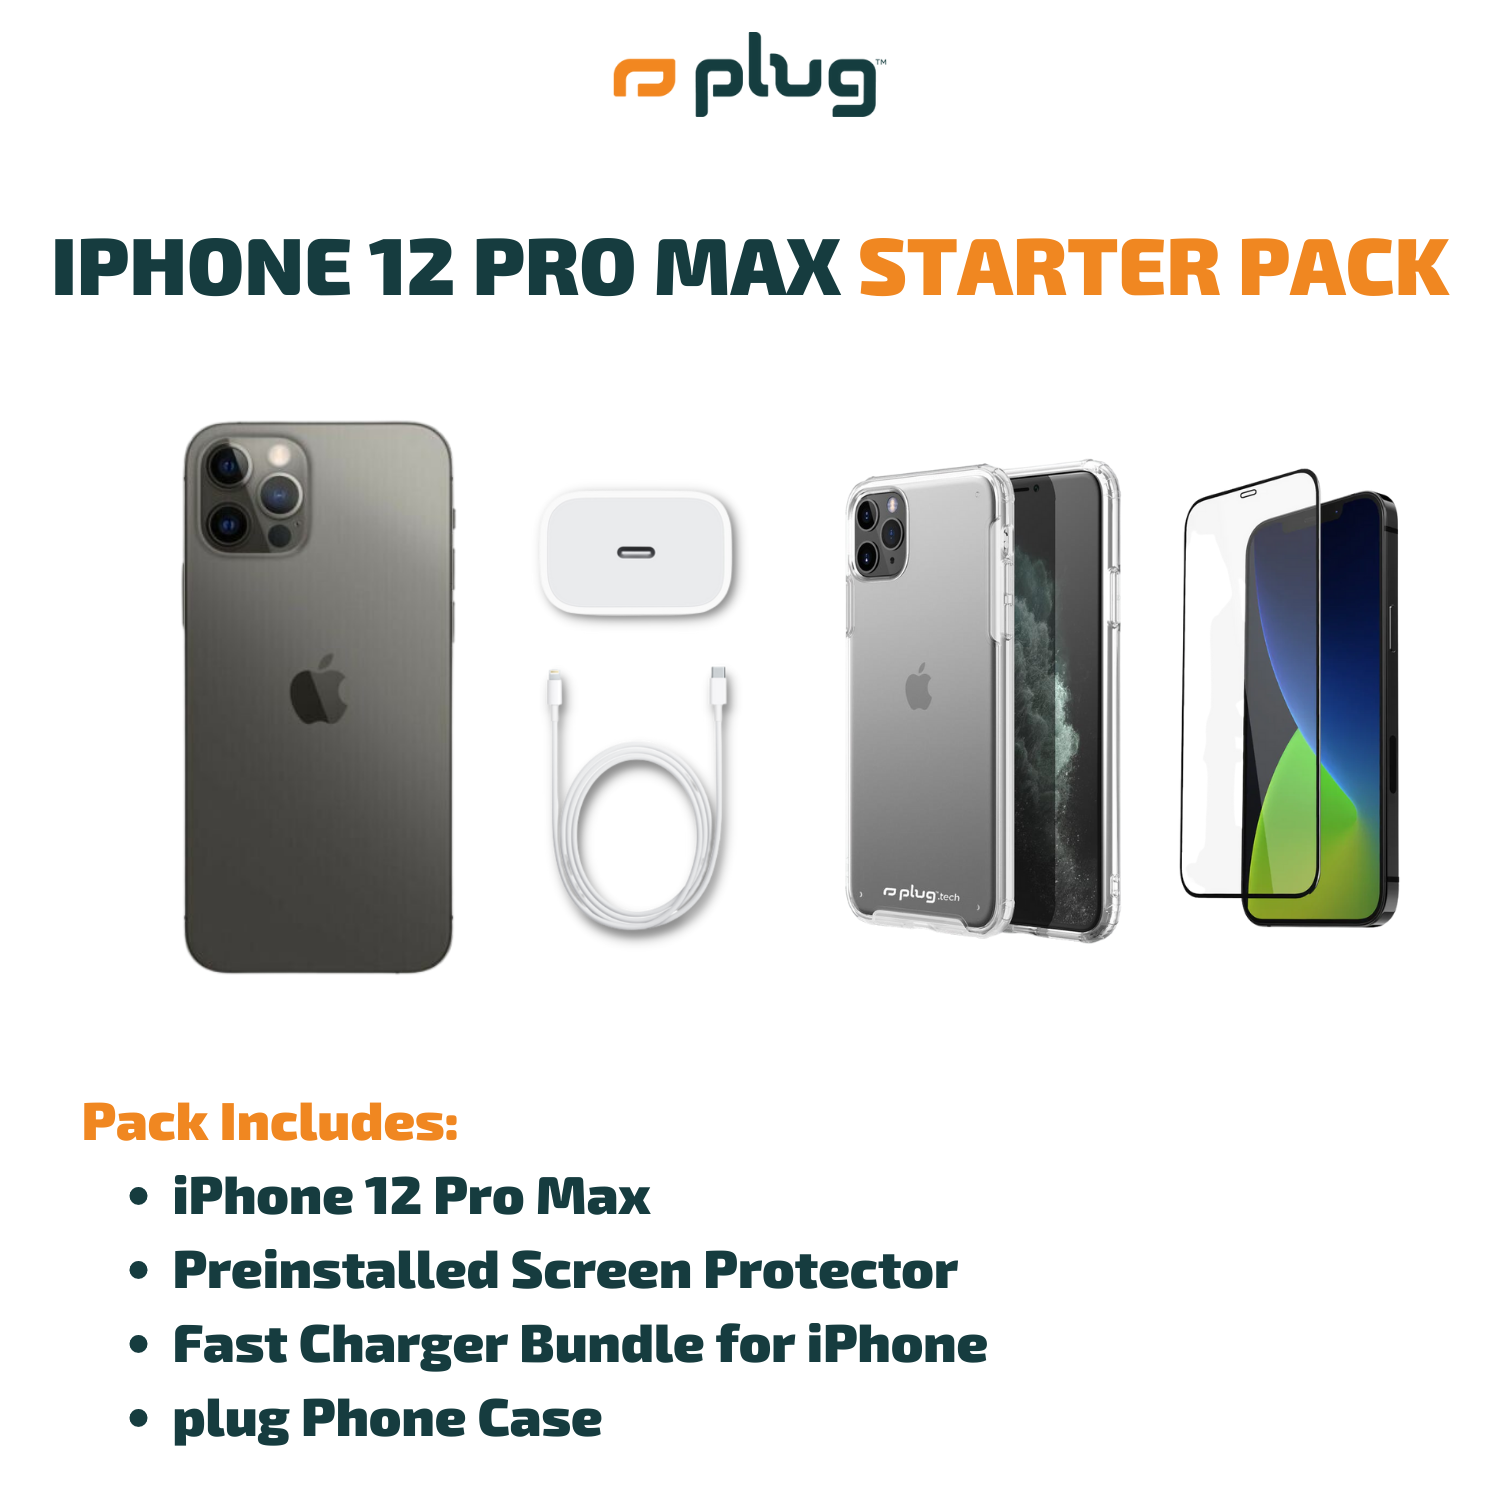 iPhone 12 Pro Max - Starter Pack - Blue / 128GB / Ecofriendly